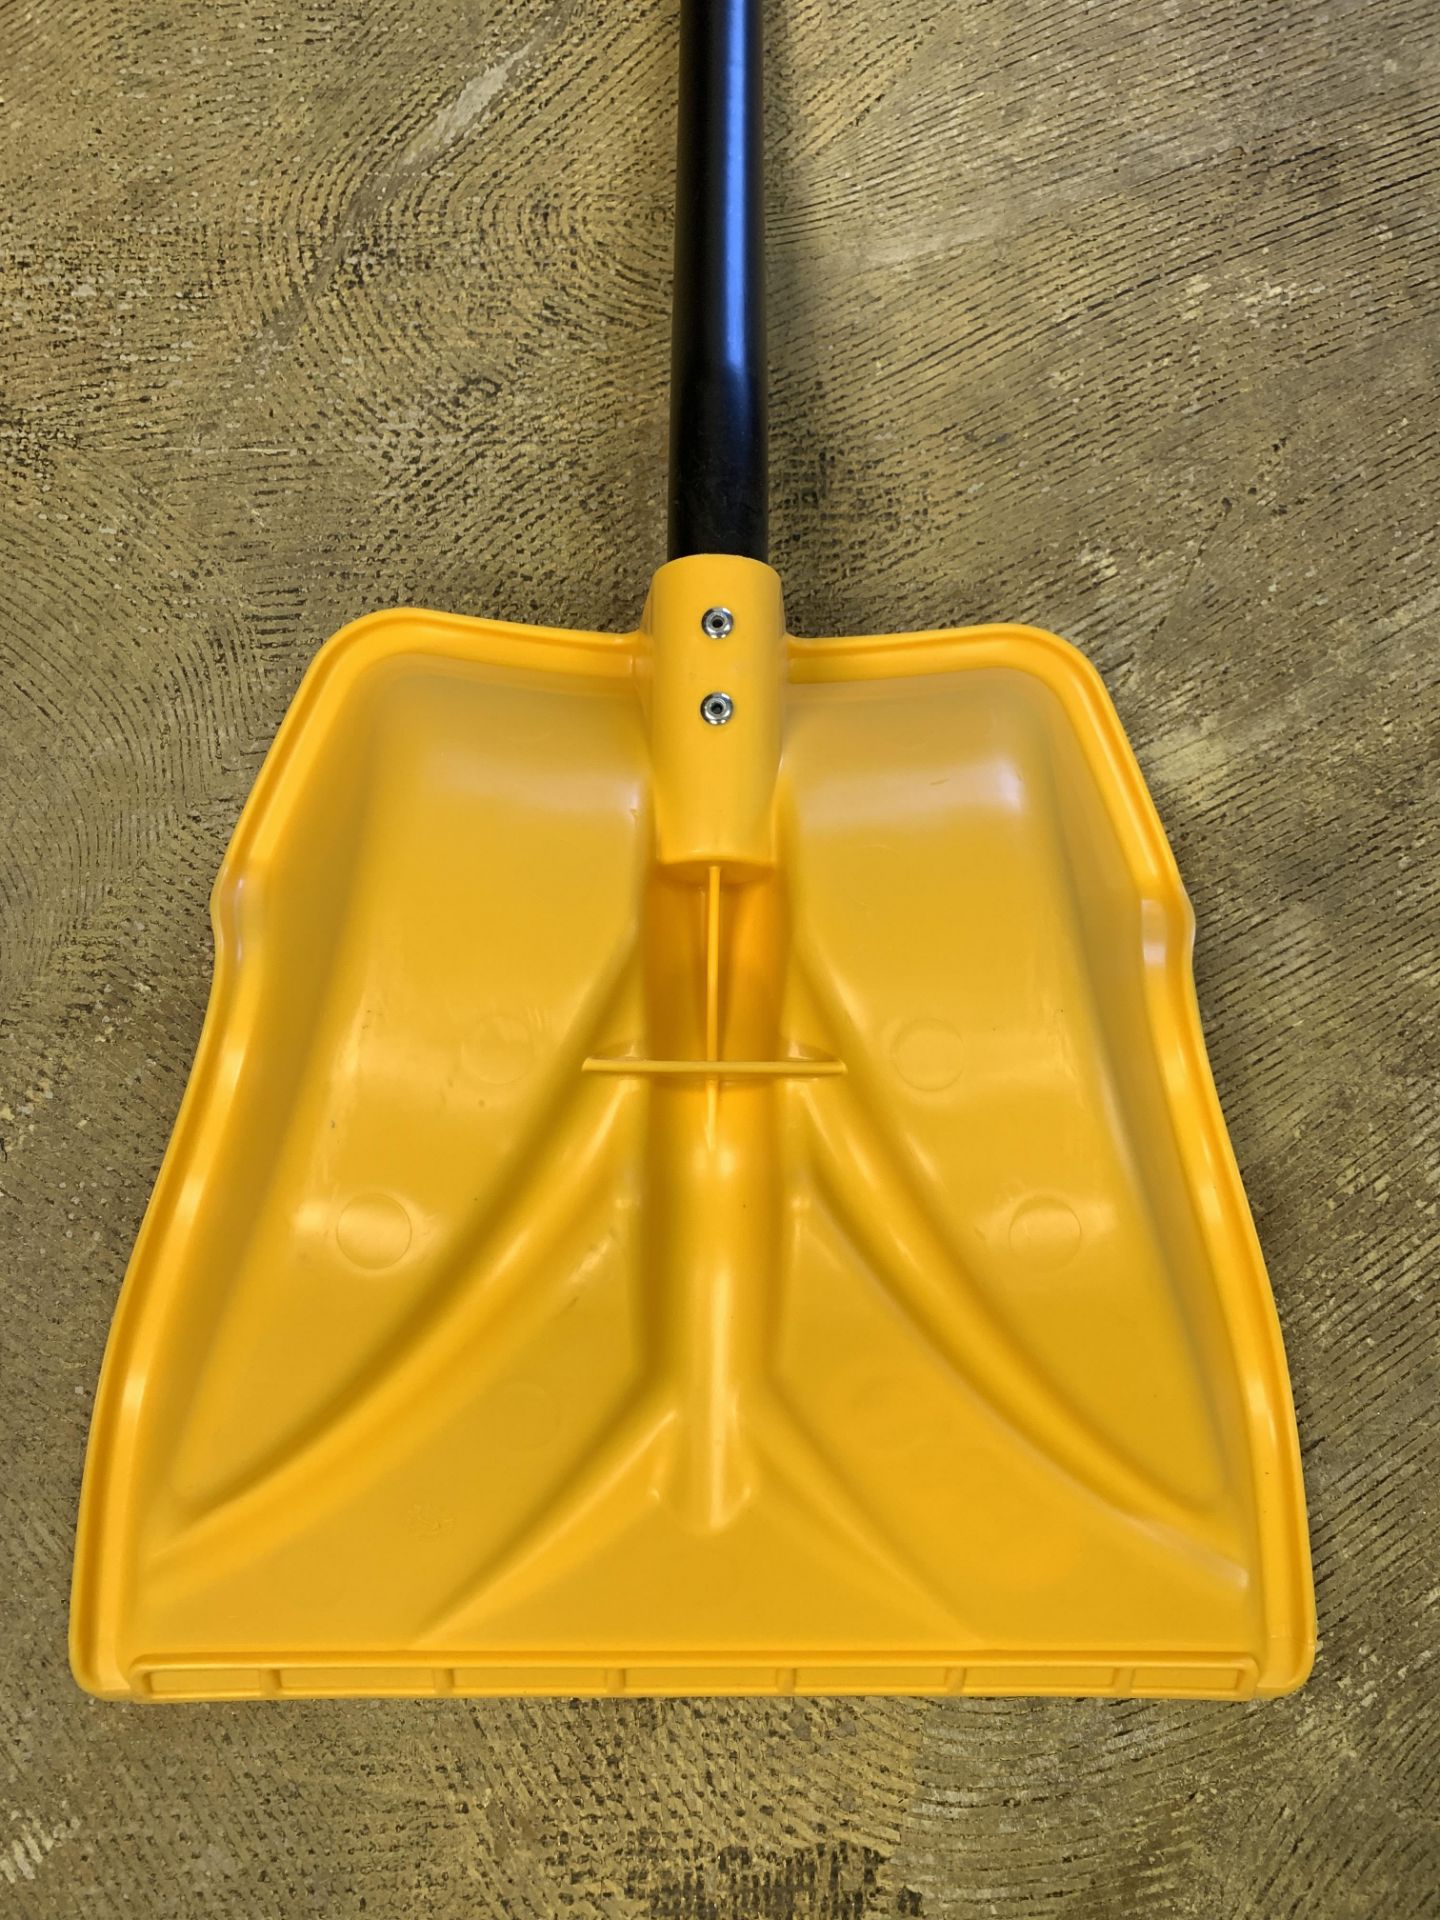 SNOW SHOVEL 51" X 19.5" WIDE, ERA GROUP, NEW, MADE IN CANADA - Image 7 of 7